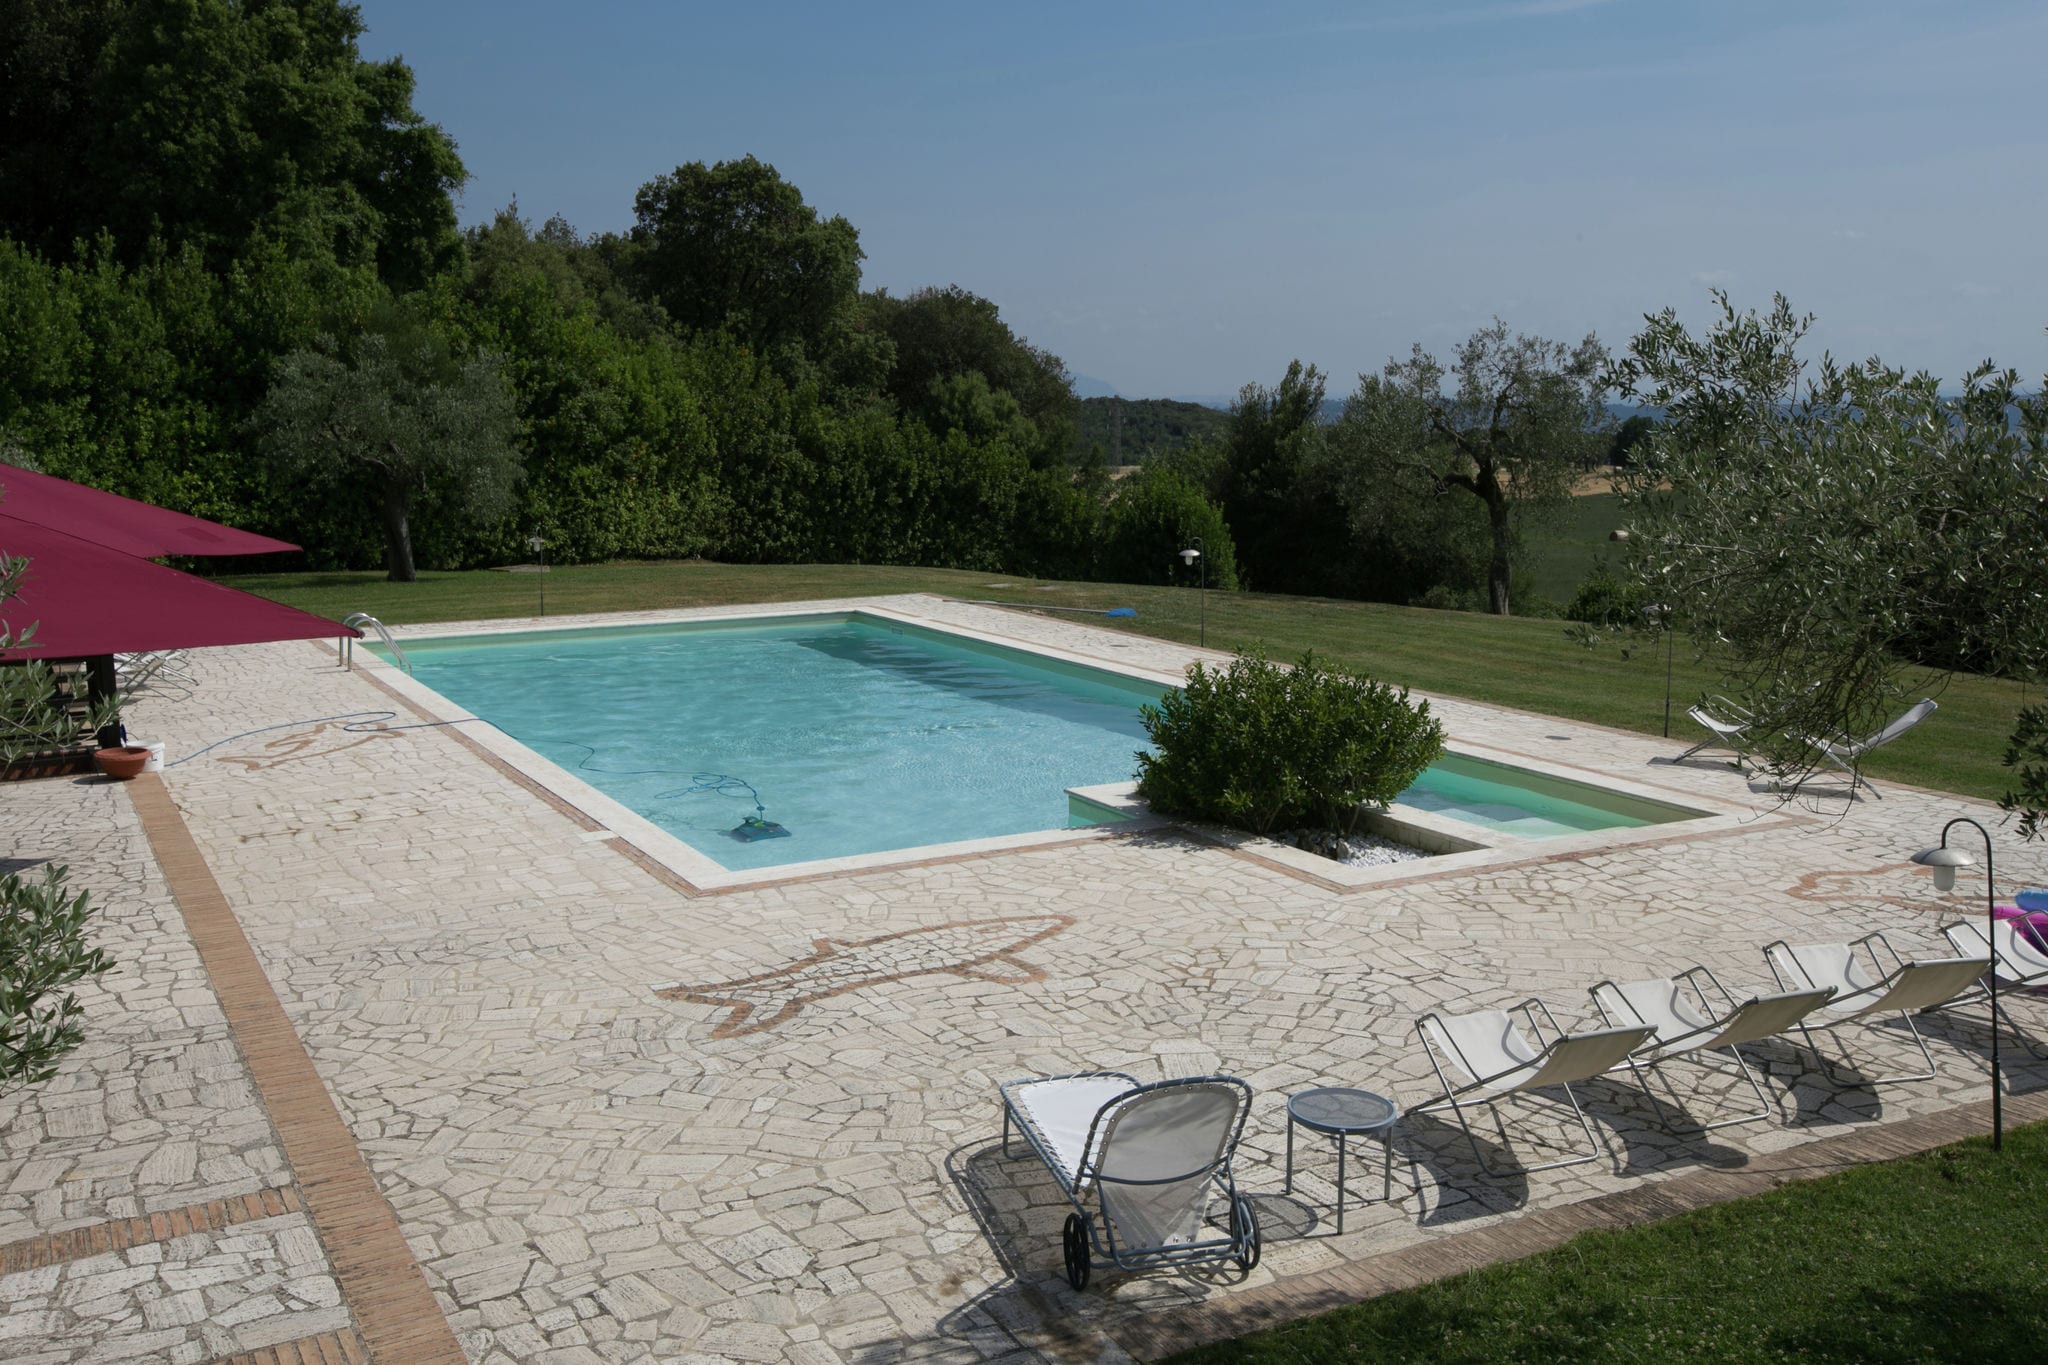 Elegant apartment with swimming pool 1 hour from Rome